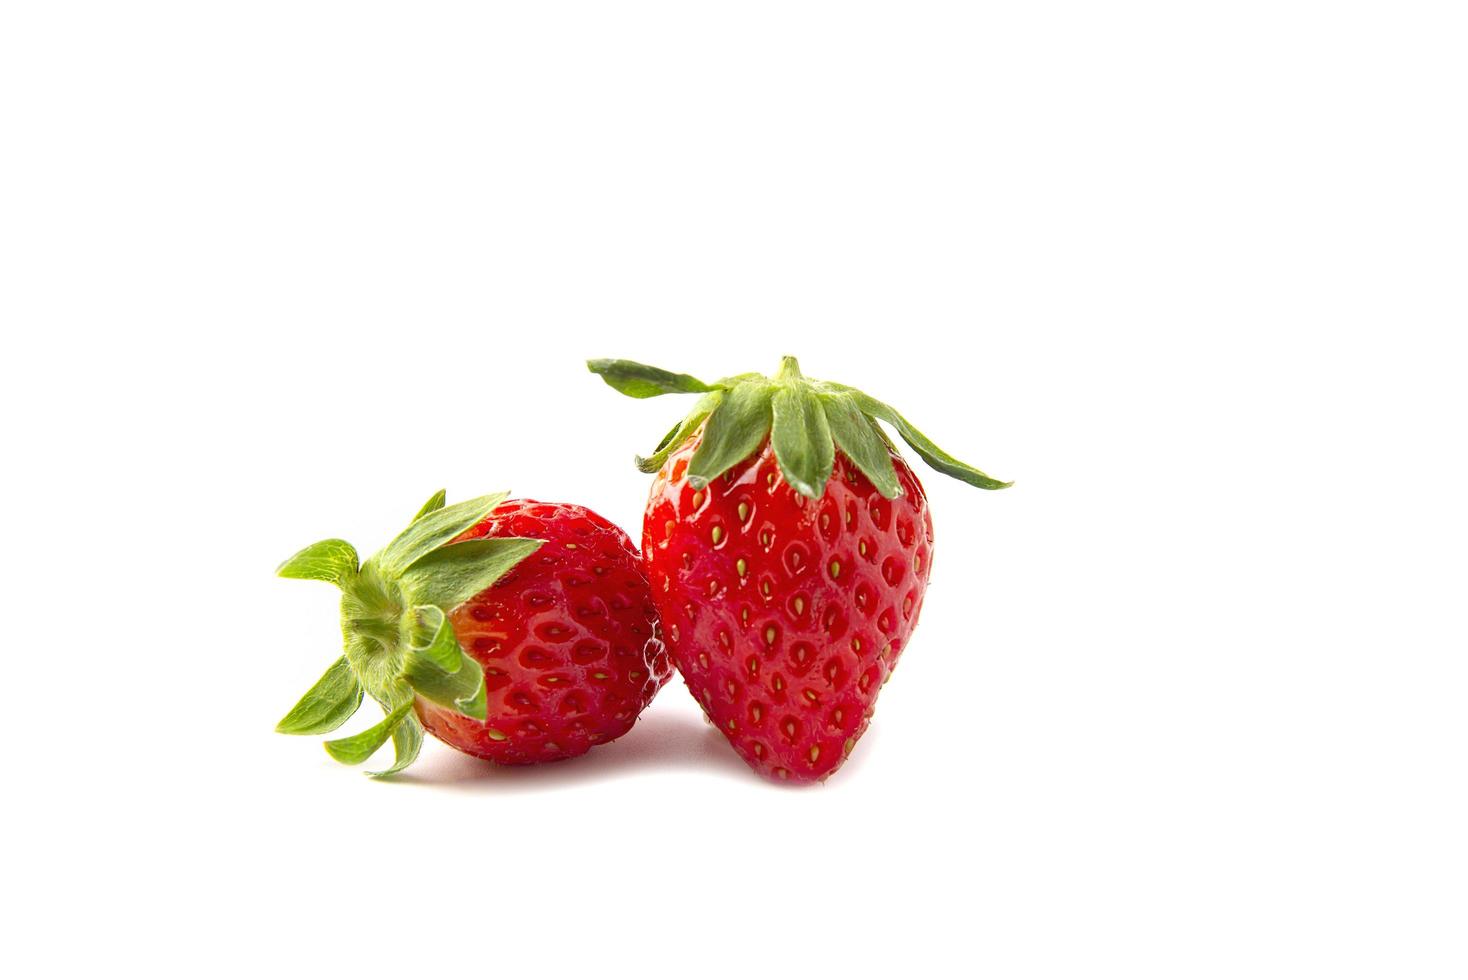 Fresh ripe strawberries isolated over white background - colorful bright strawberries concept photo